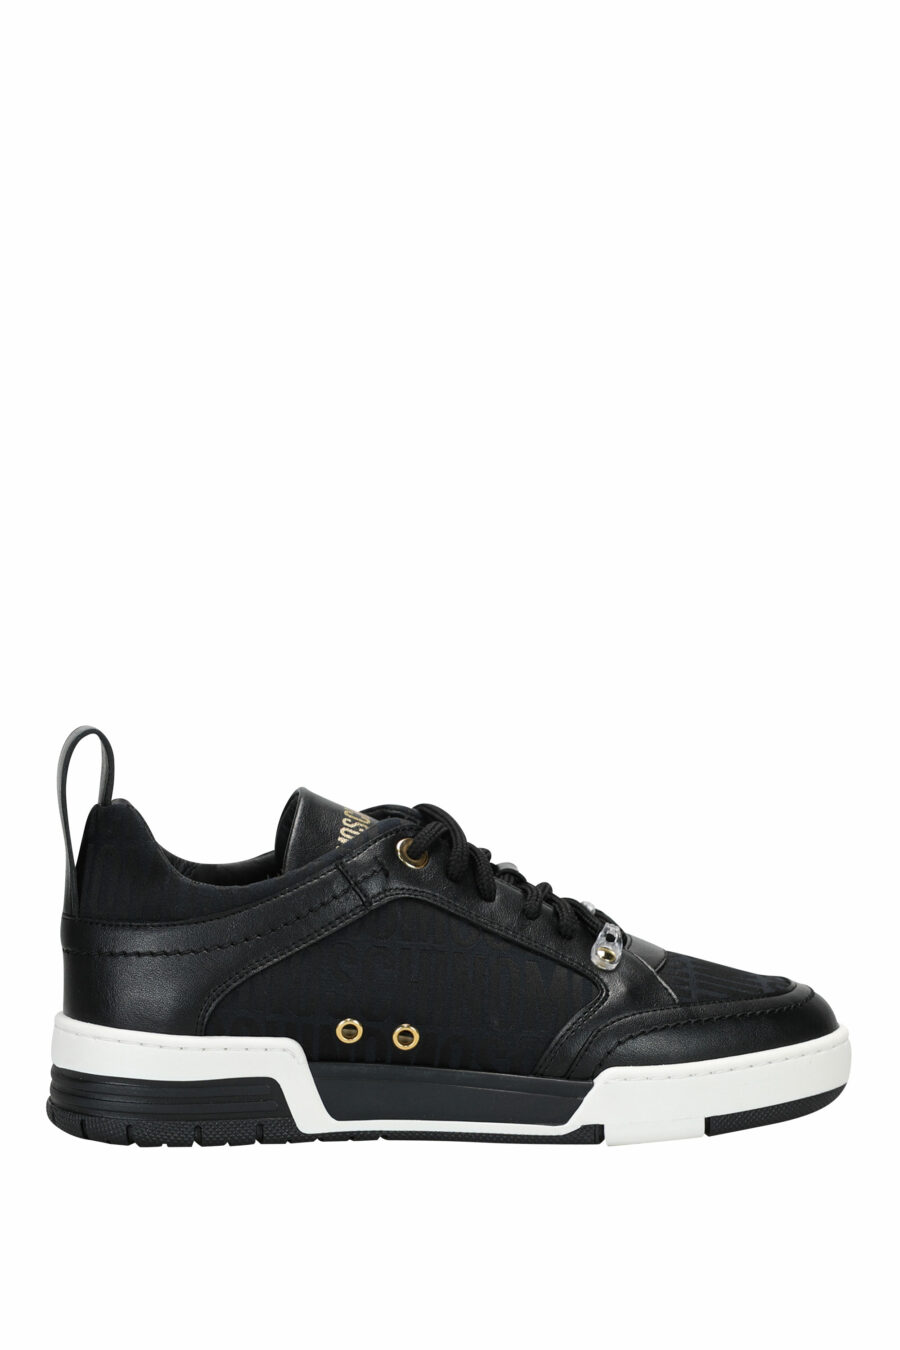 Black leather trainers with "all over logo" and white sole - 8054653835405